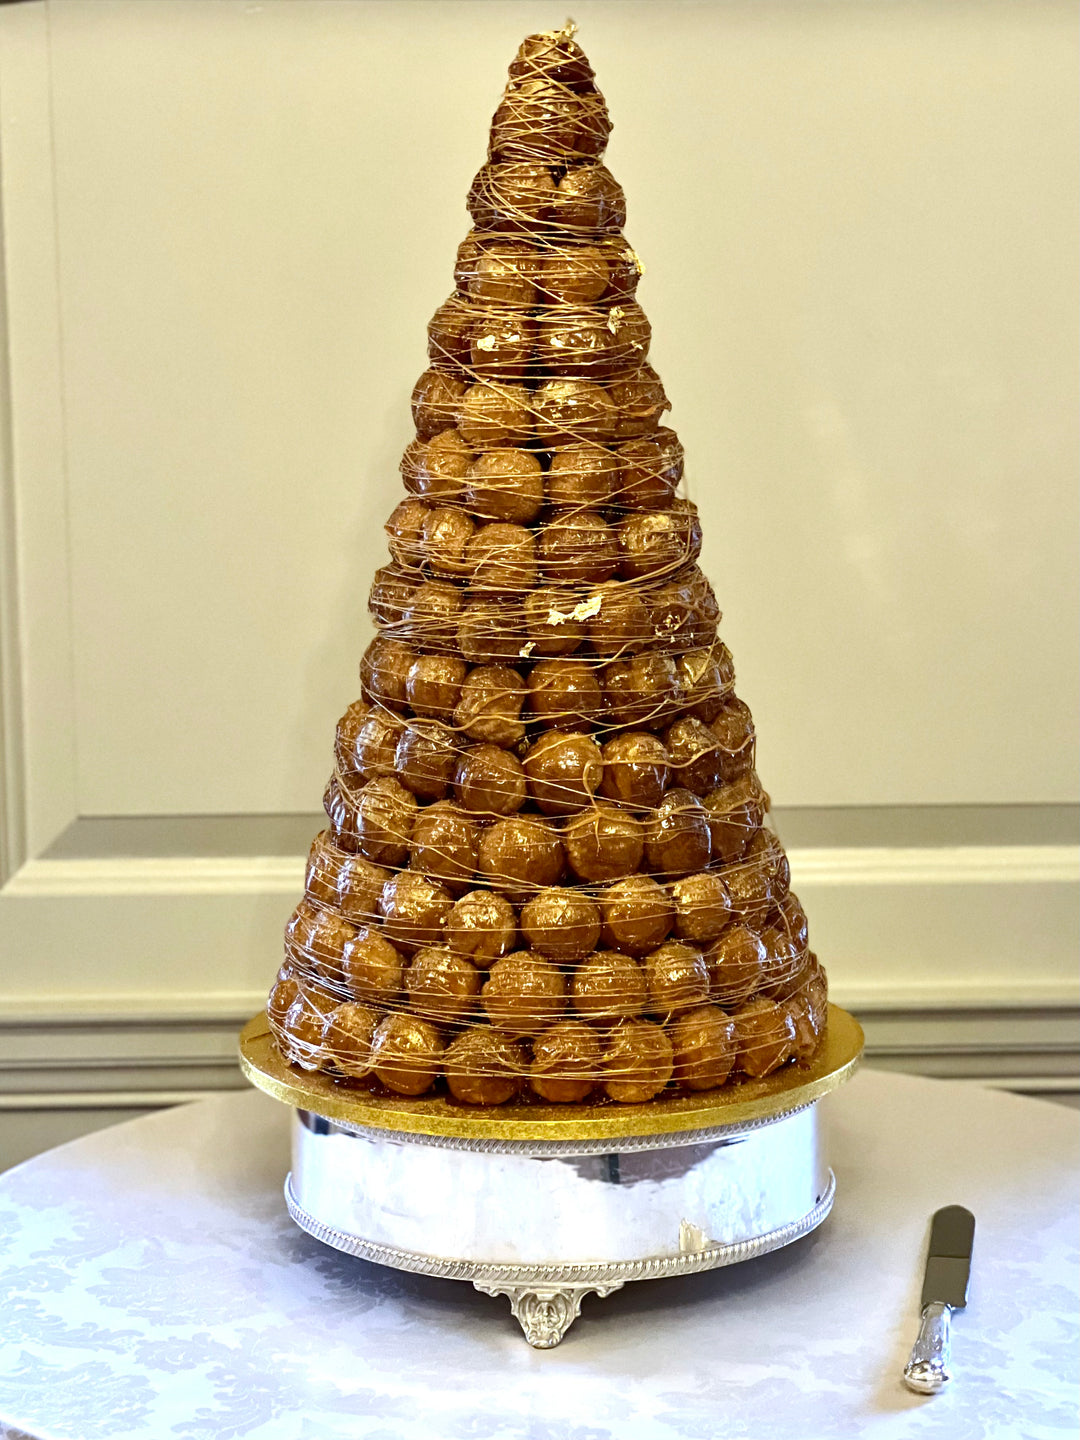 A croquembouche on a stand with a knife